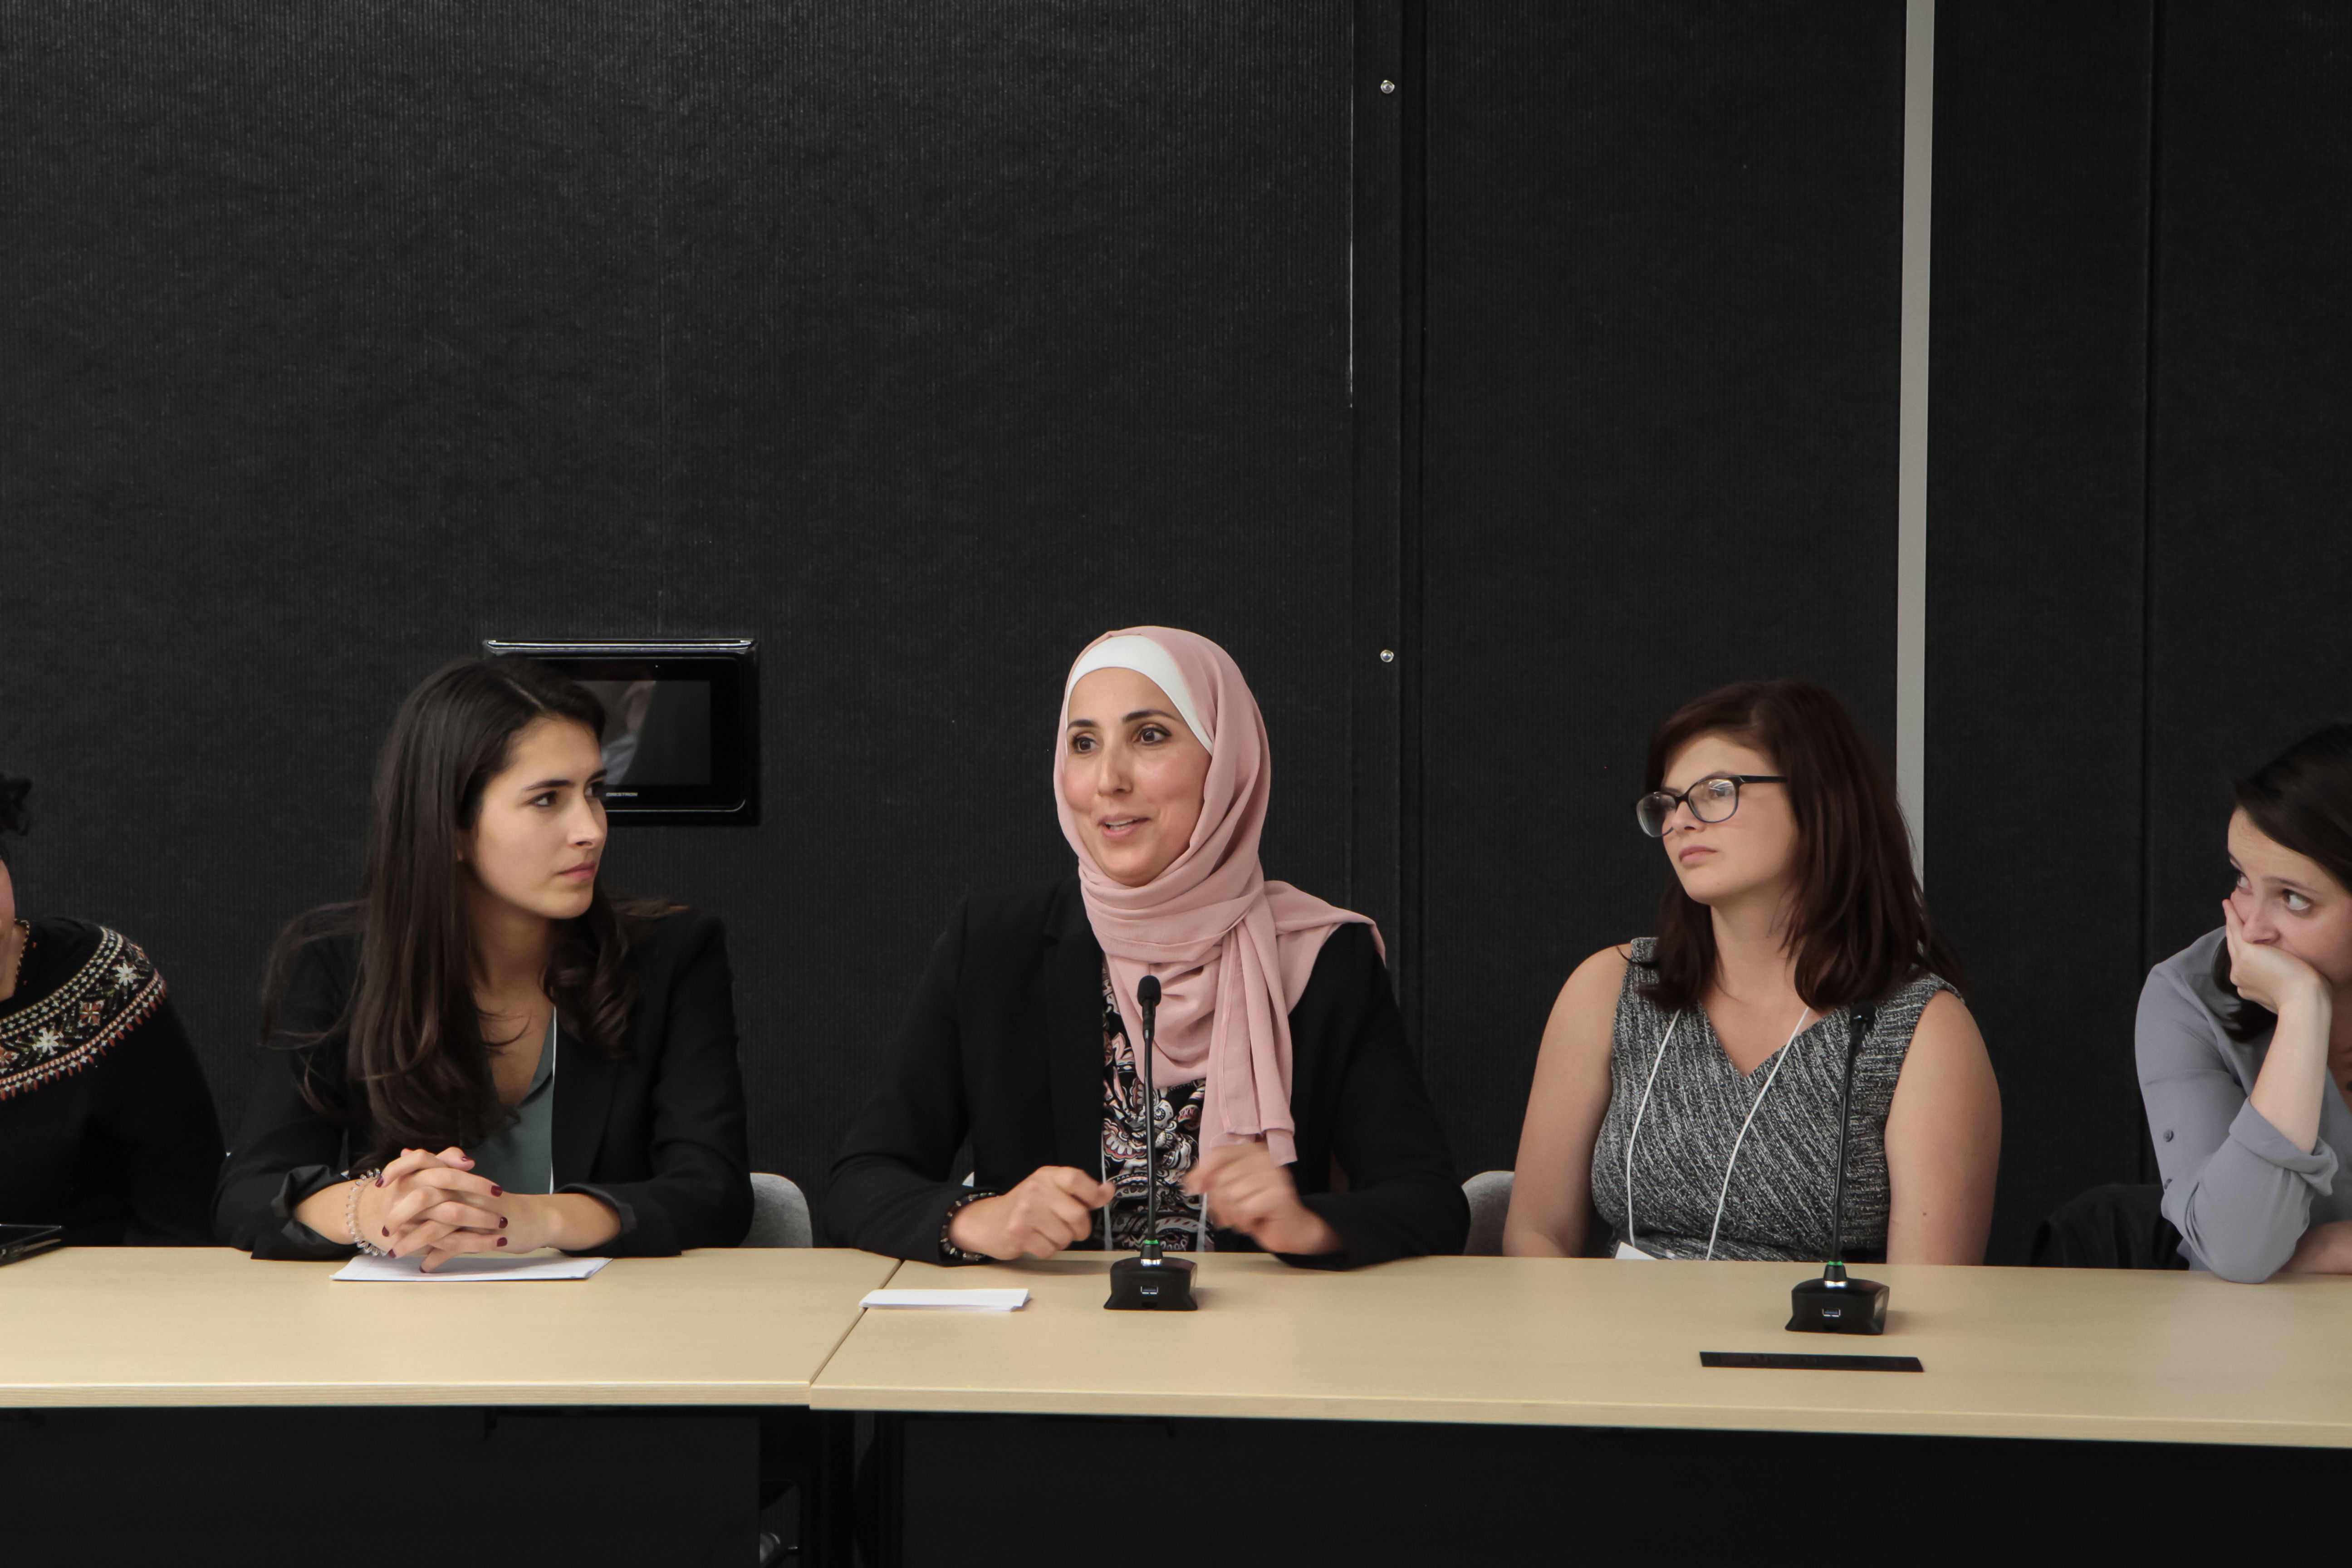 Shirin Alhroob from Forsyth Technical Community College answers a question while Mariana Rivas from Texas Christian University, Taylor Damann from Southern Illinois University Carbondale, and Cammie Behnke from Elon University listen. Image by Nora Moraga-Lewy. United States, 2019.